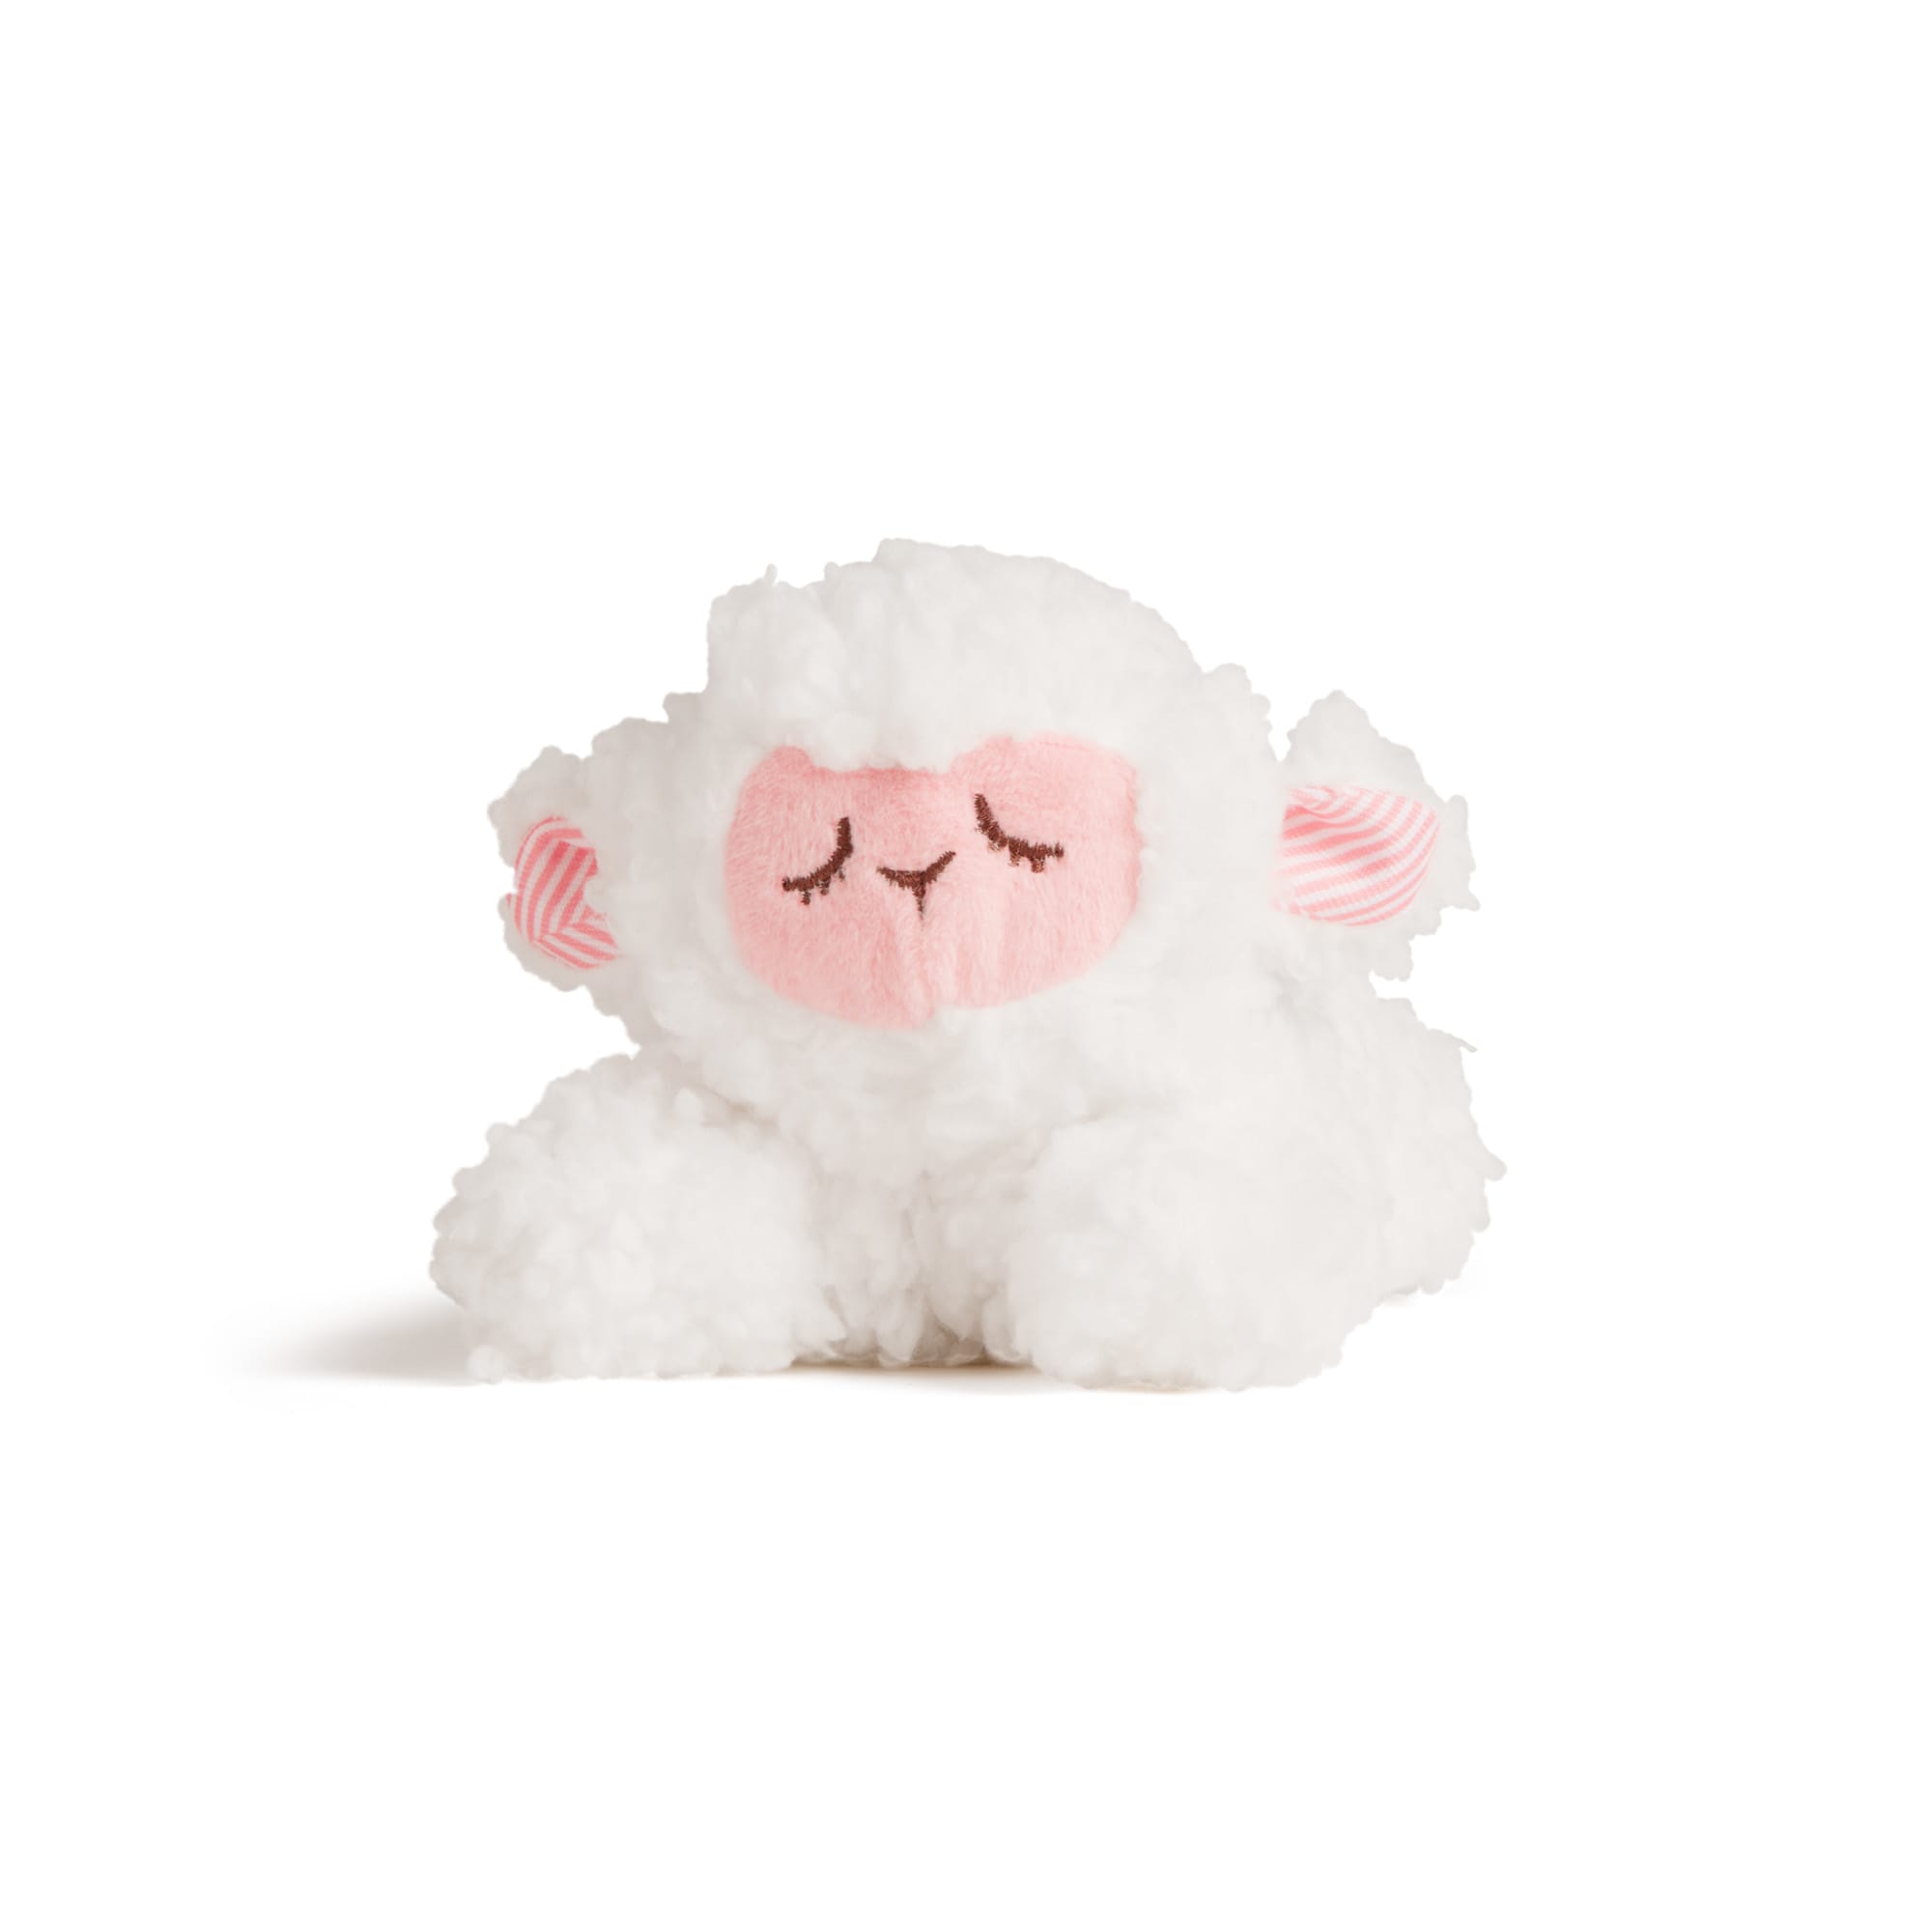 small sheep toy